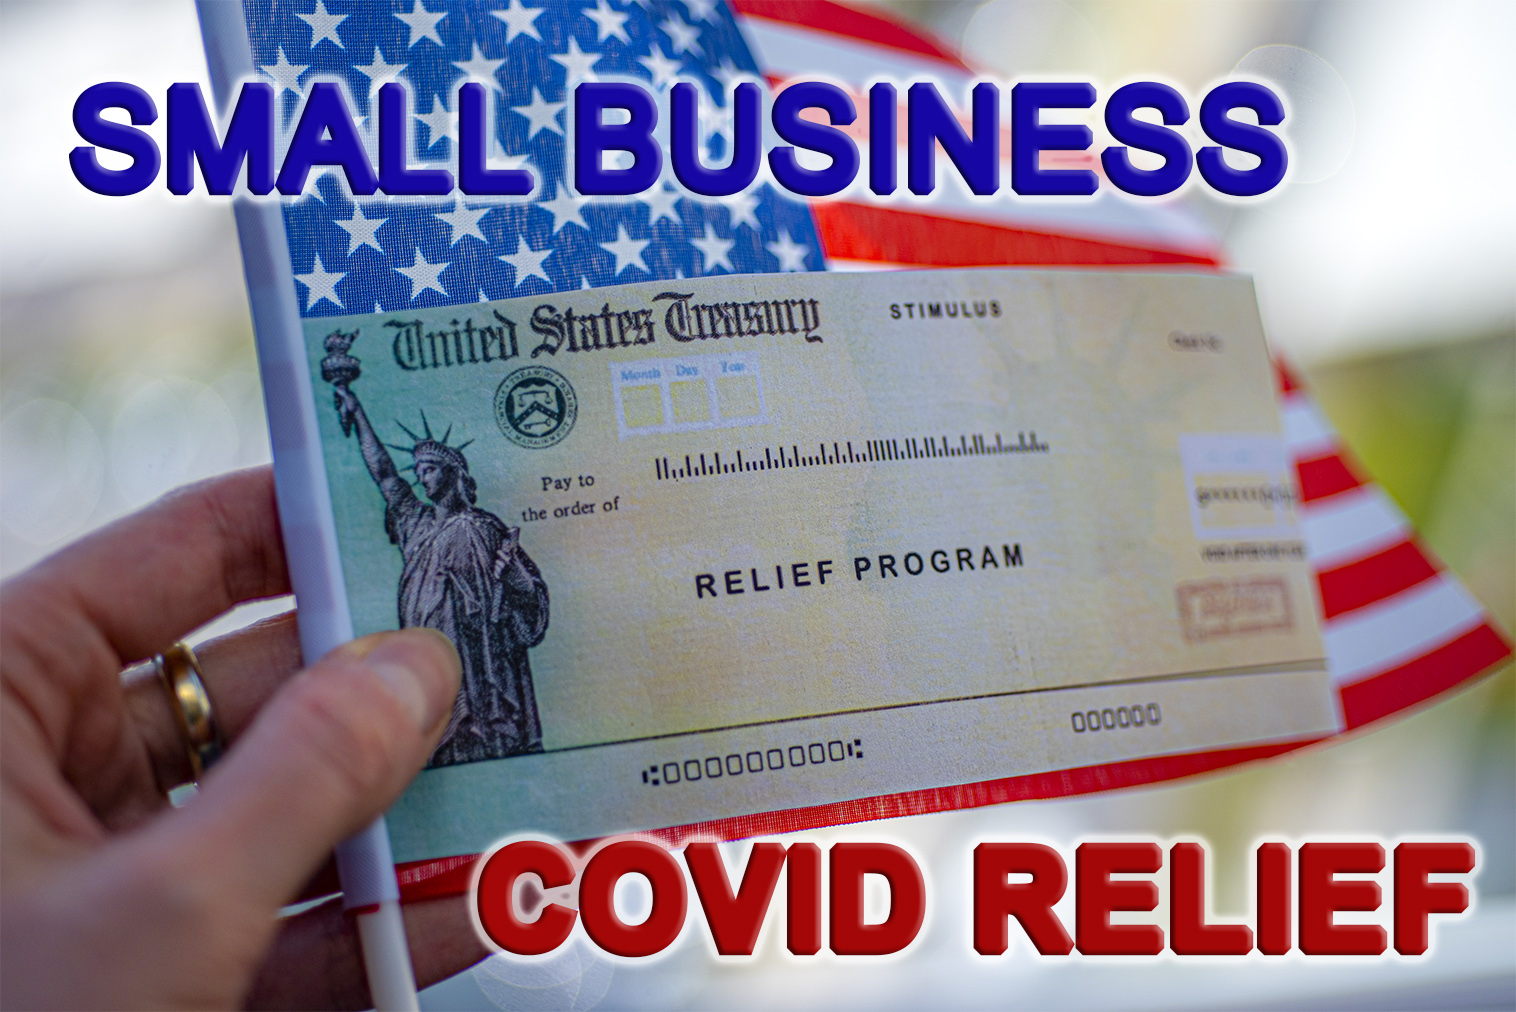 Changes to the Small Business Administration Economic Relief Program